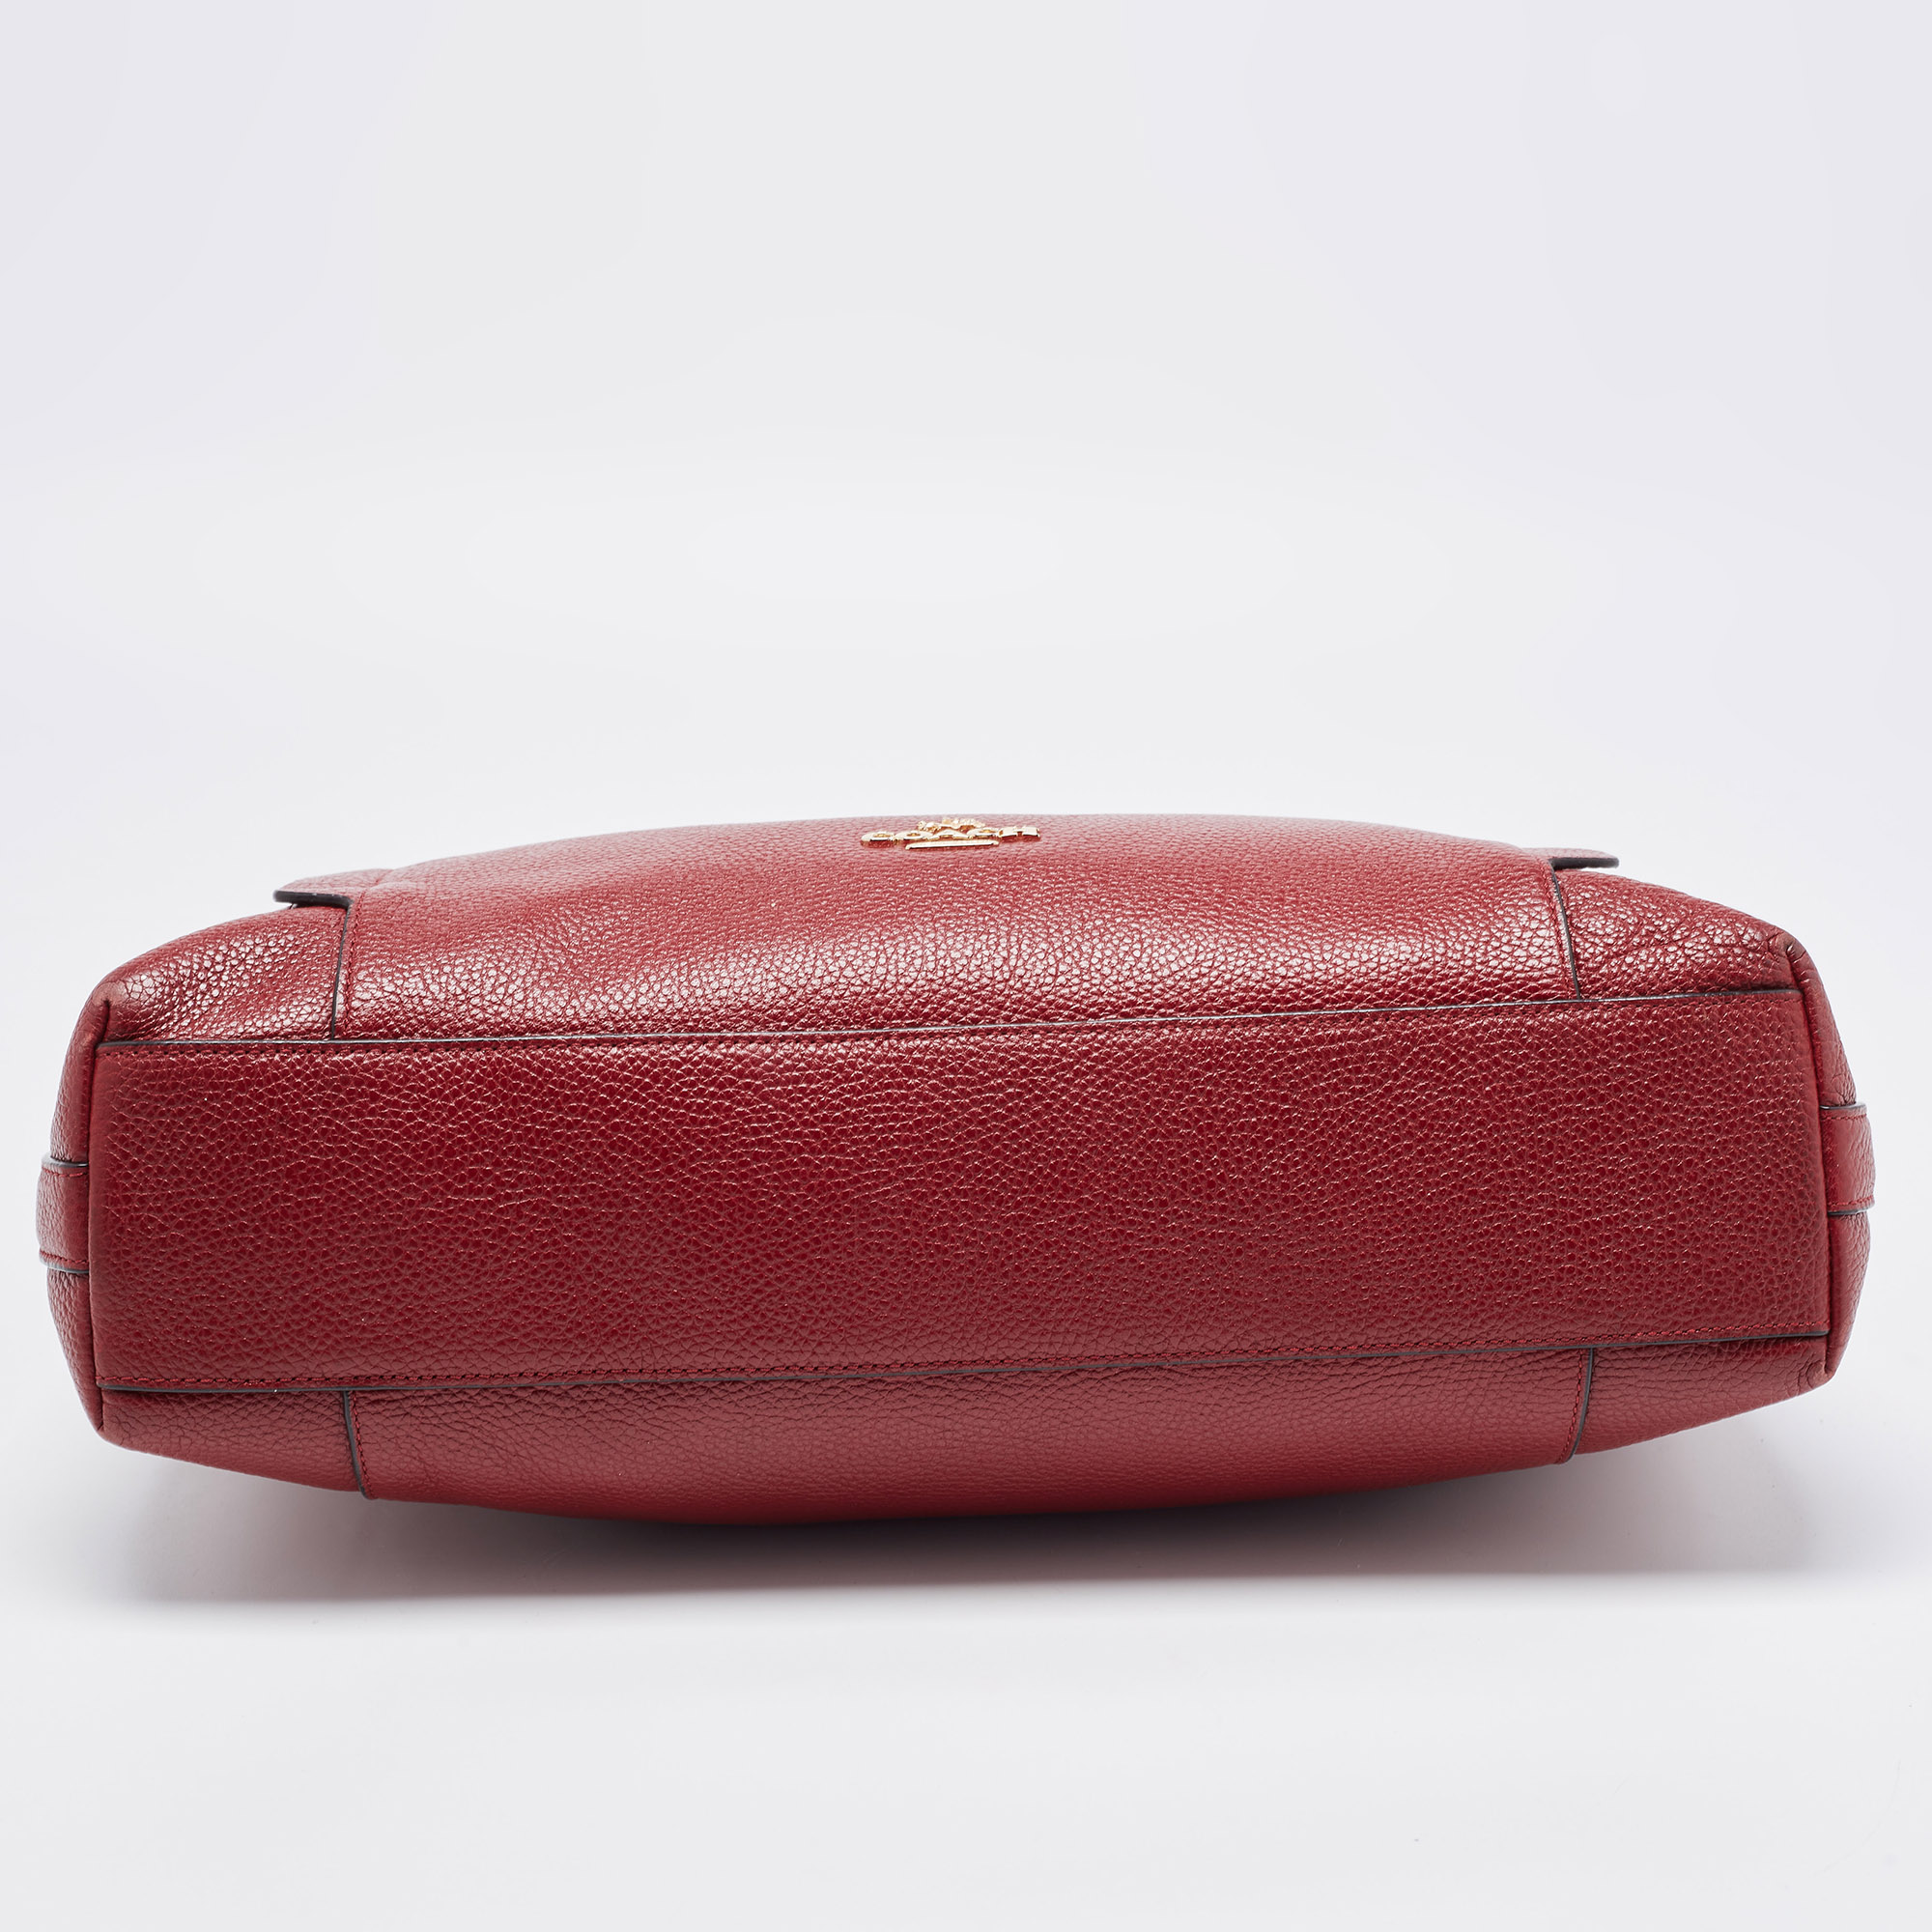 Coach Red Leather Marlon Hobo